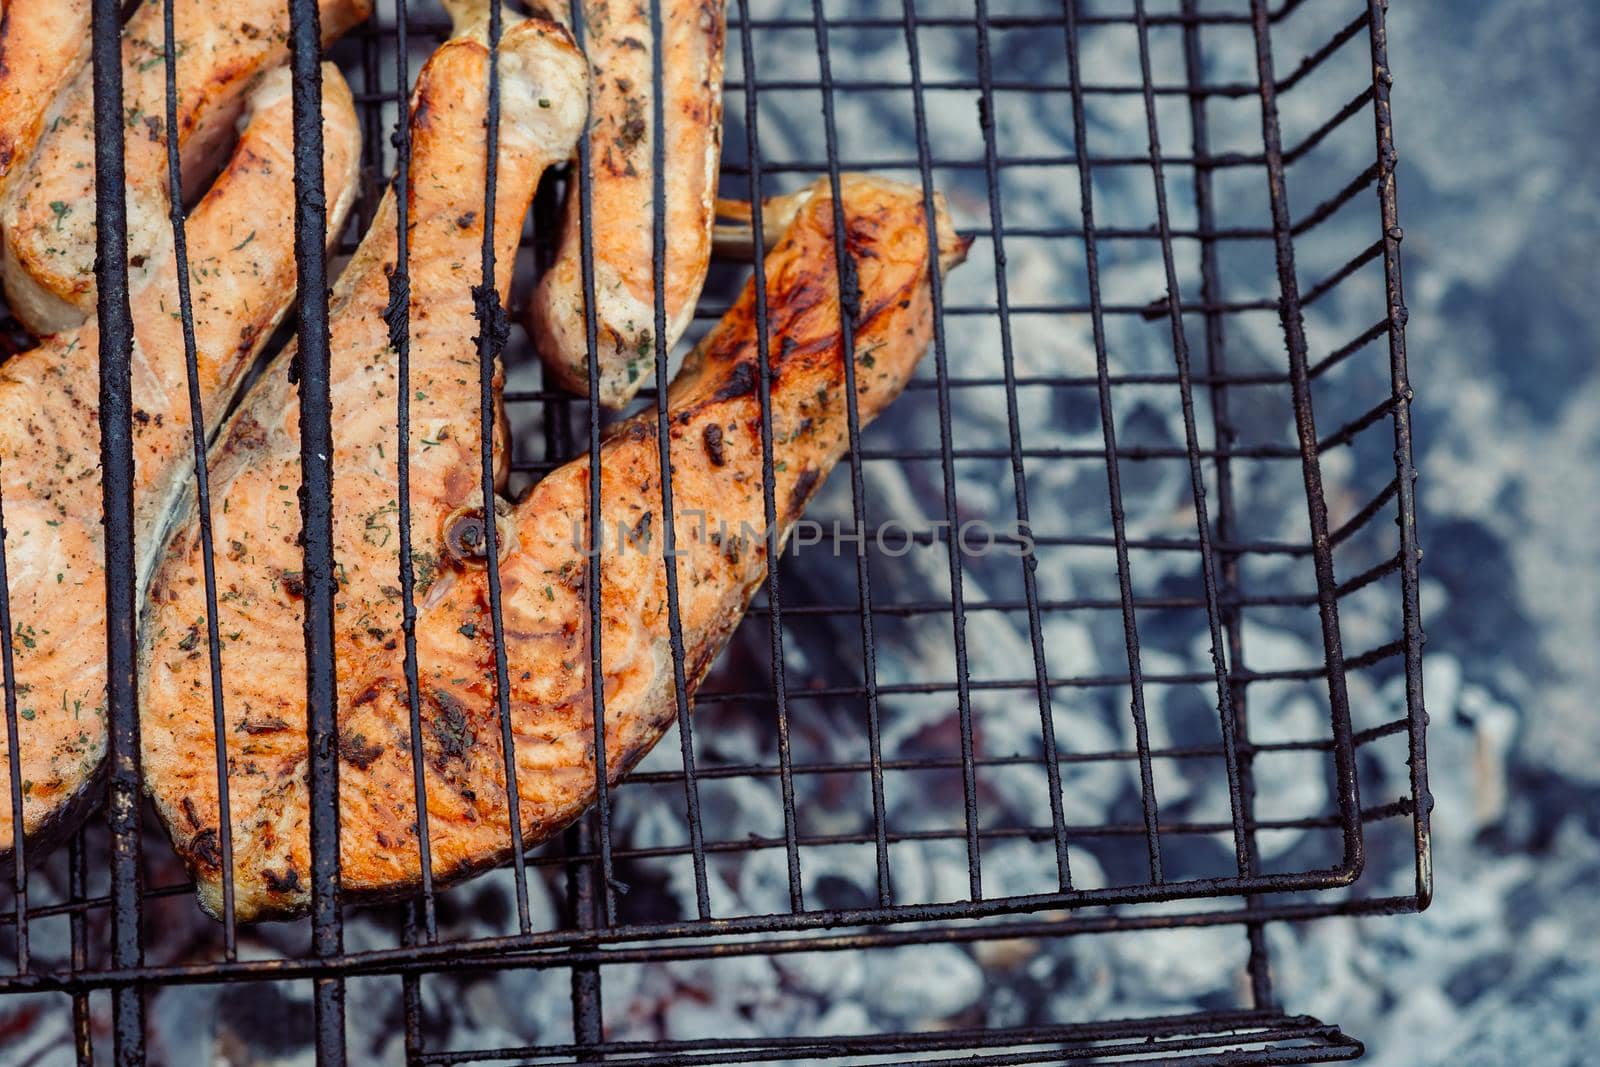 grilled fish bbq charcoal cooking nature summer. High quality photo